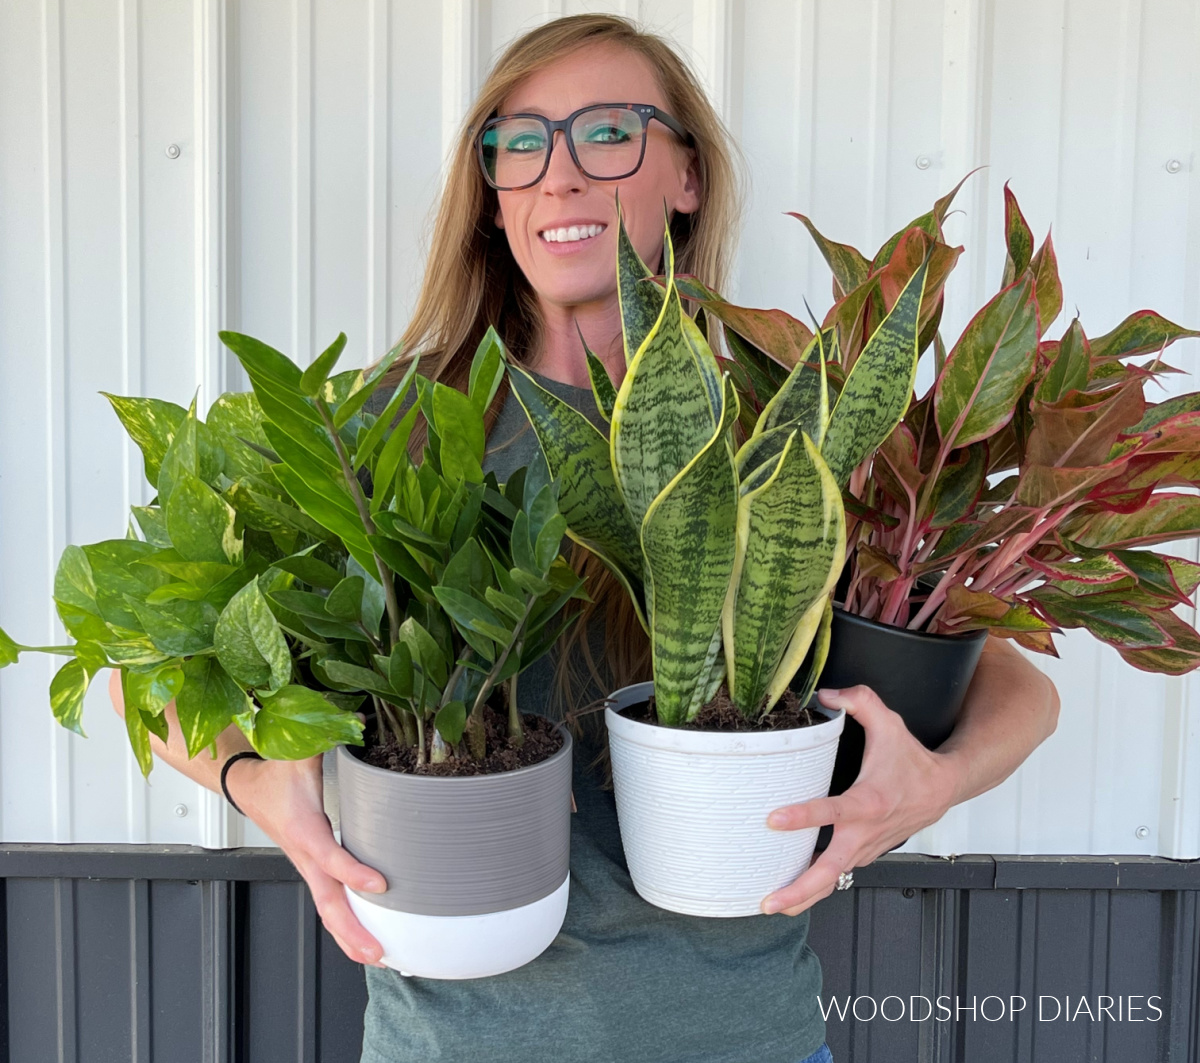 Shara Woodshop Diaries holding various plants in her arms